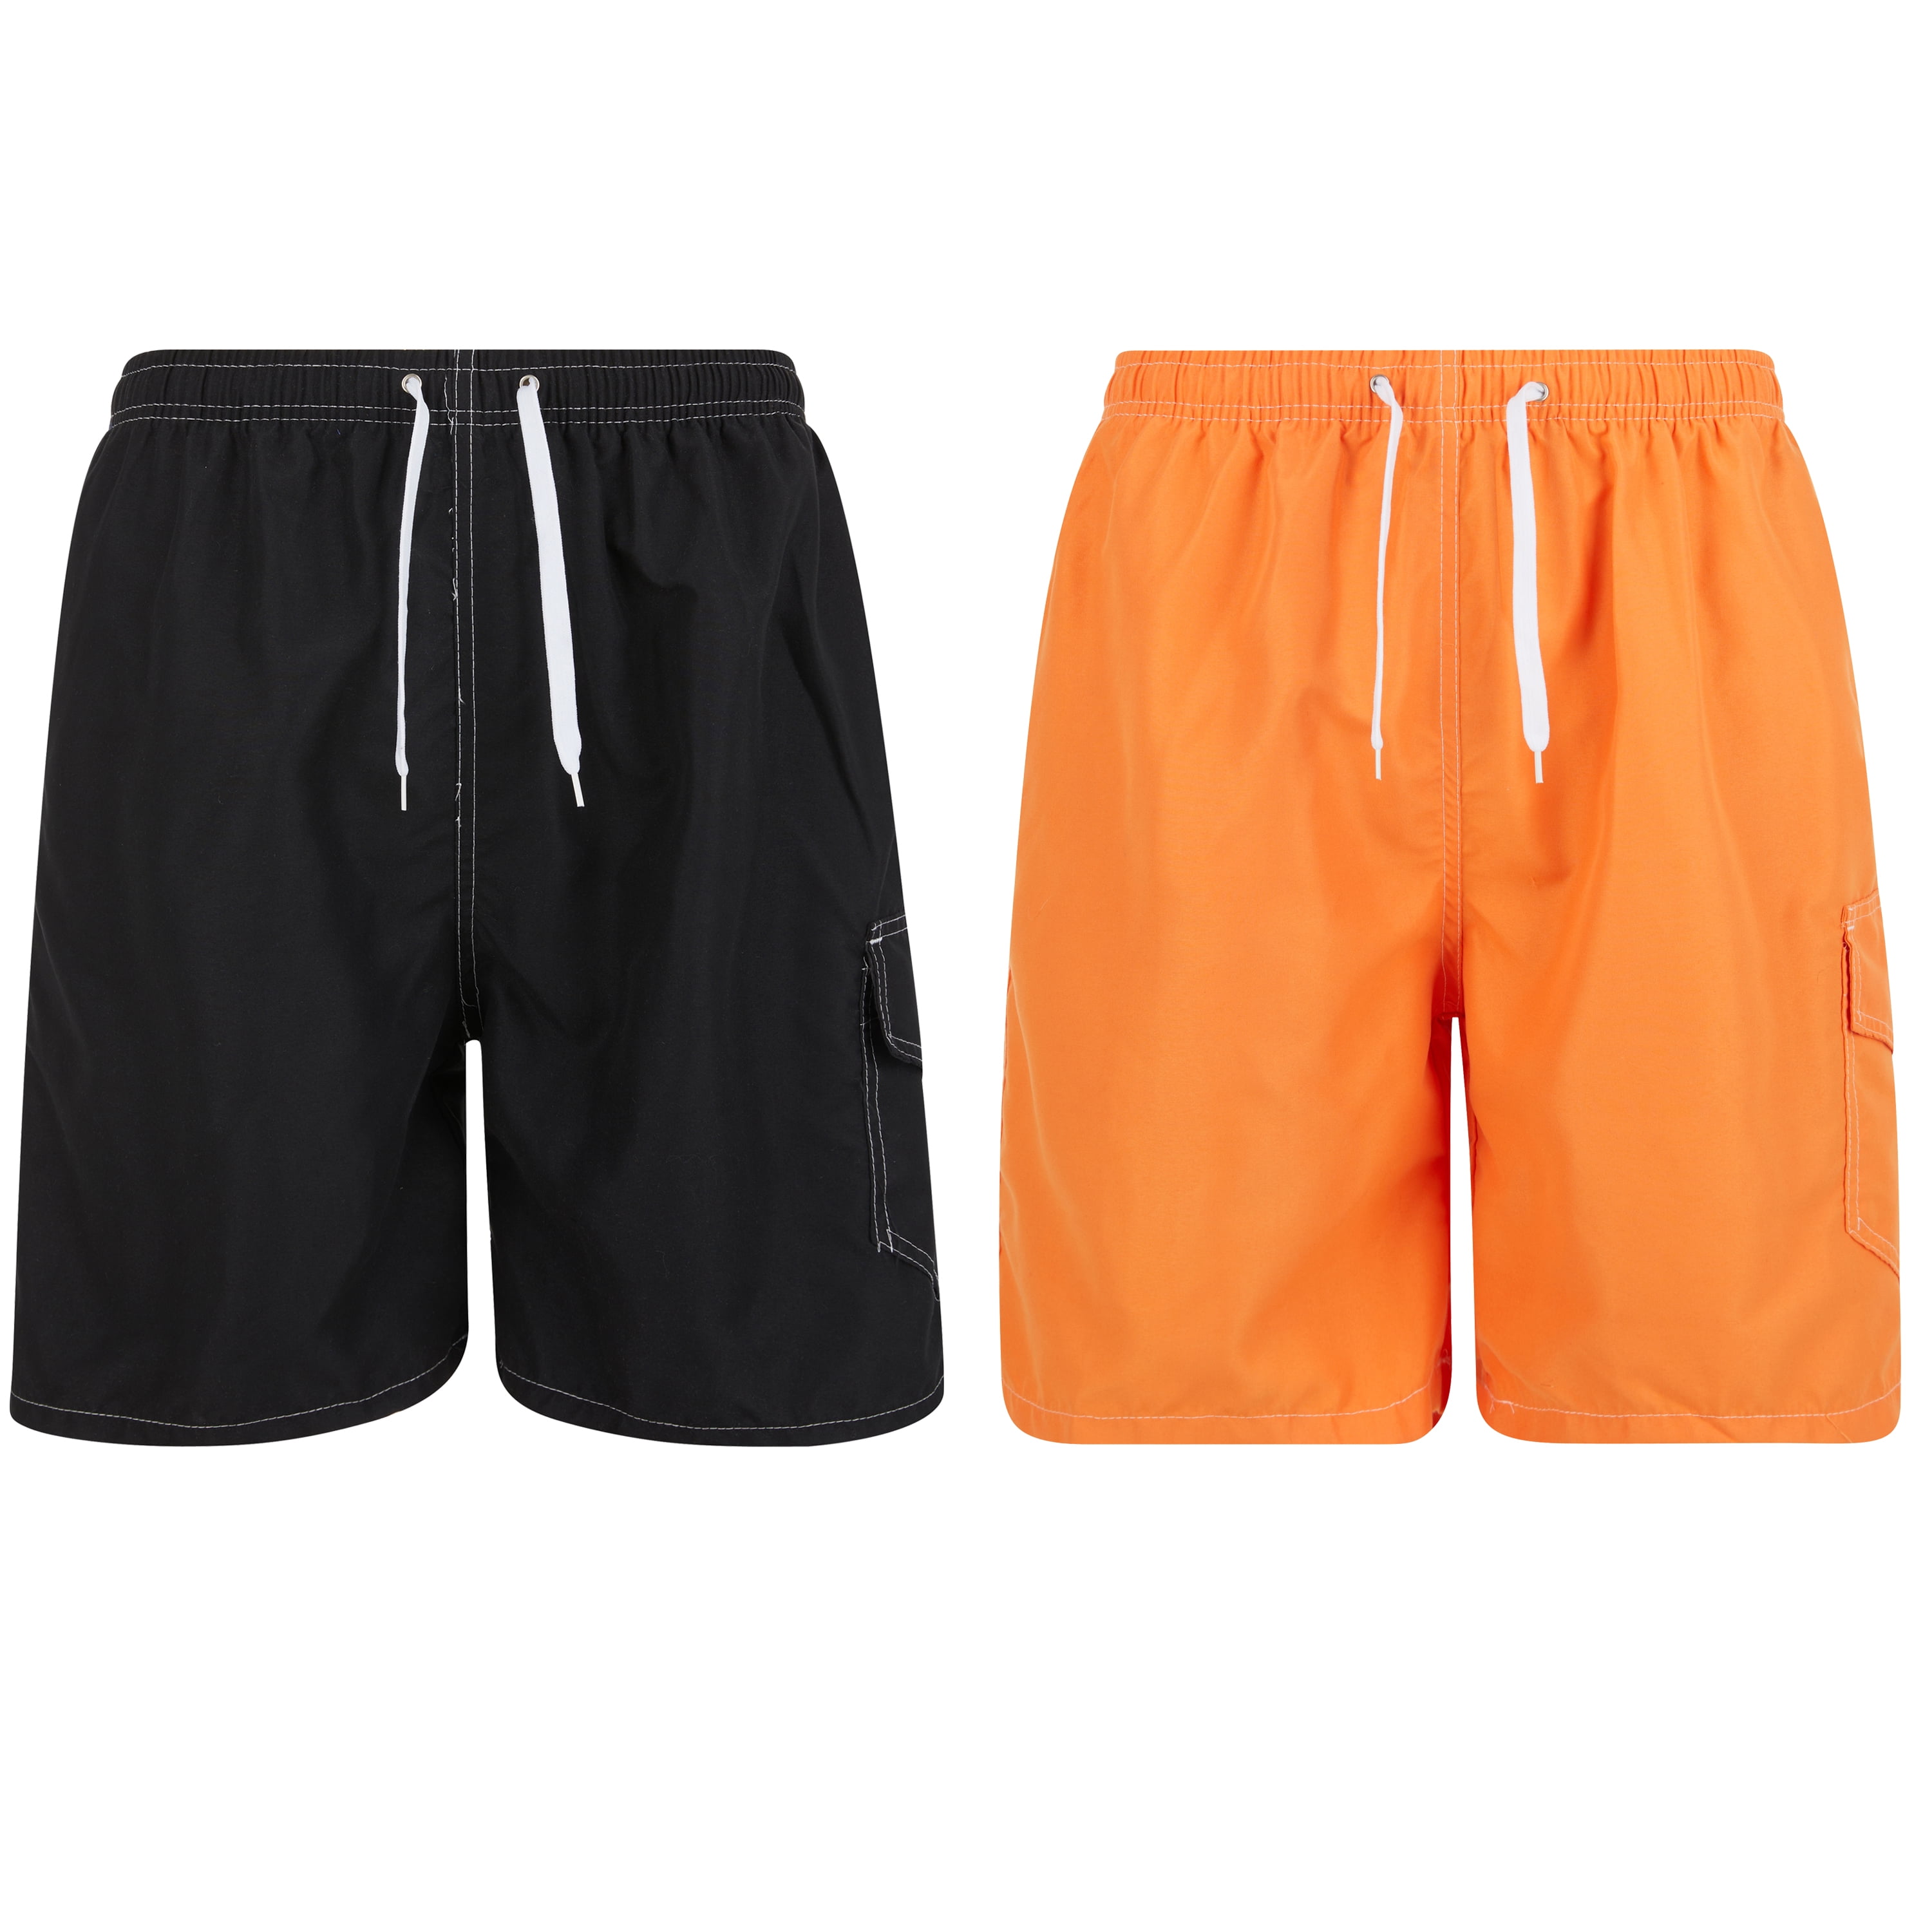 iBerryNY Mens Swim Trunks Adult Male Board Shorts Quick Dry, Cargo